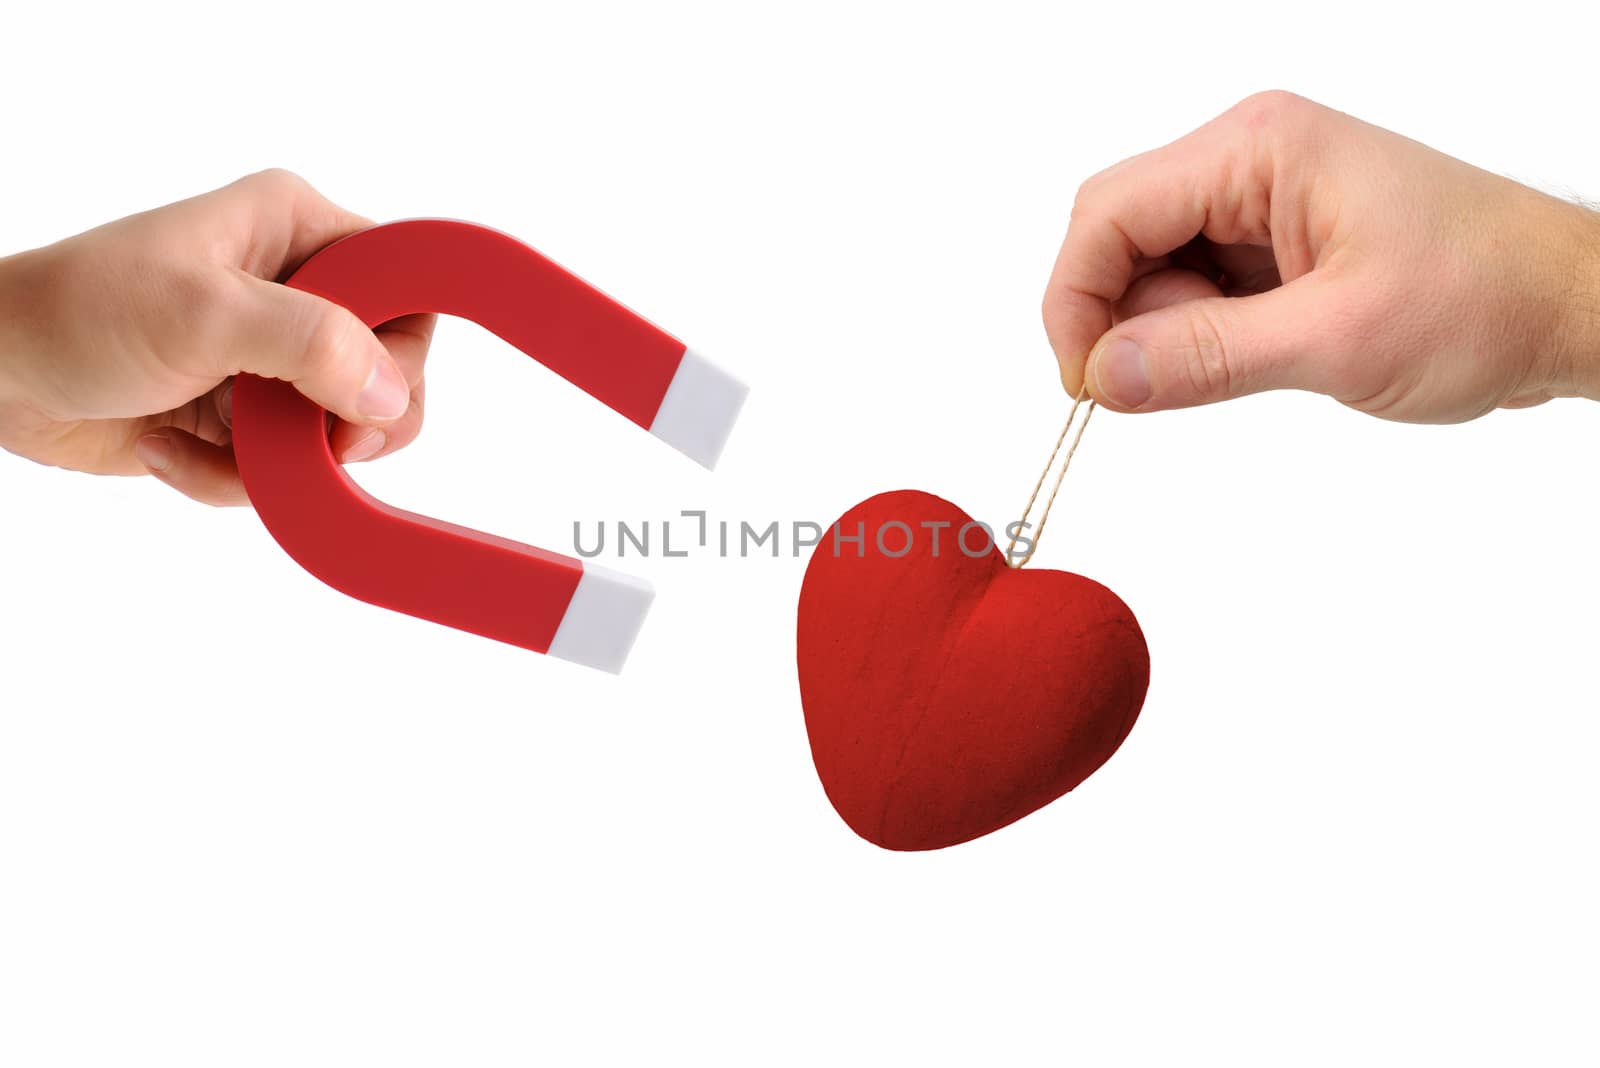 Concept of attracting another’s heart isolated on white